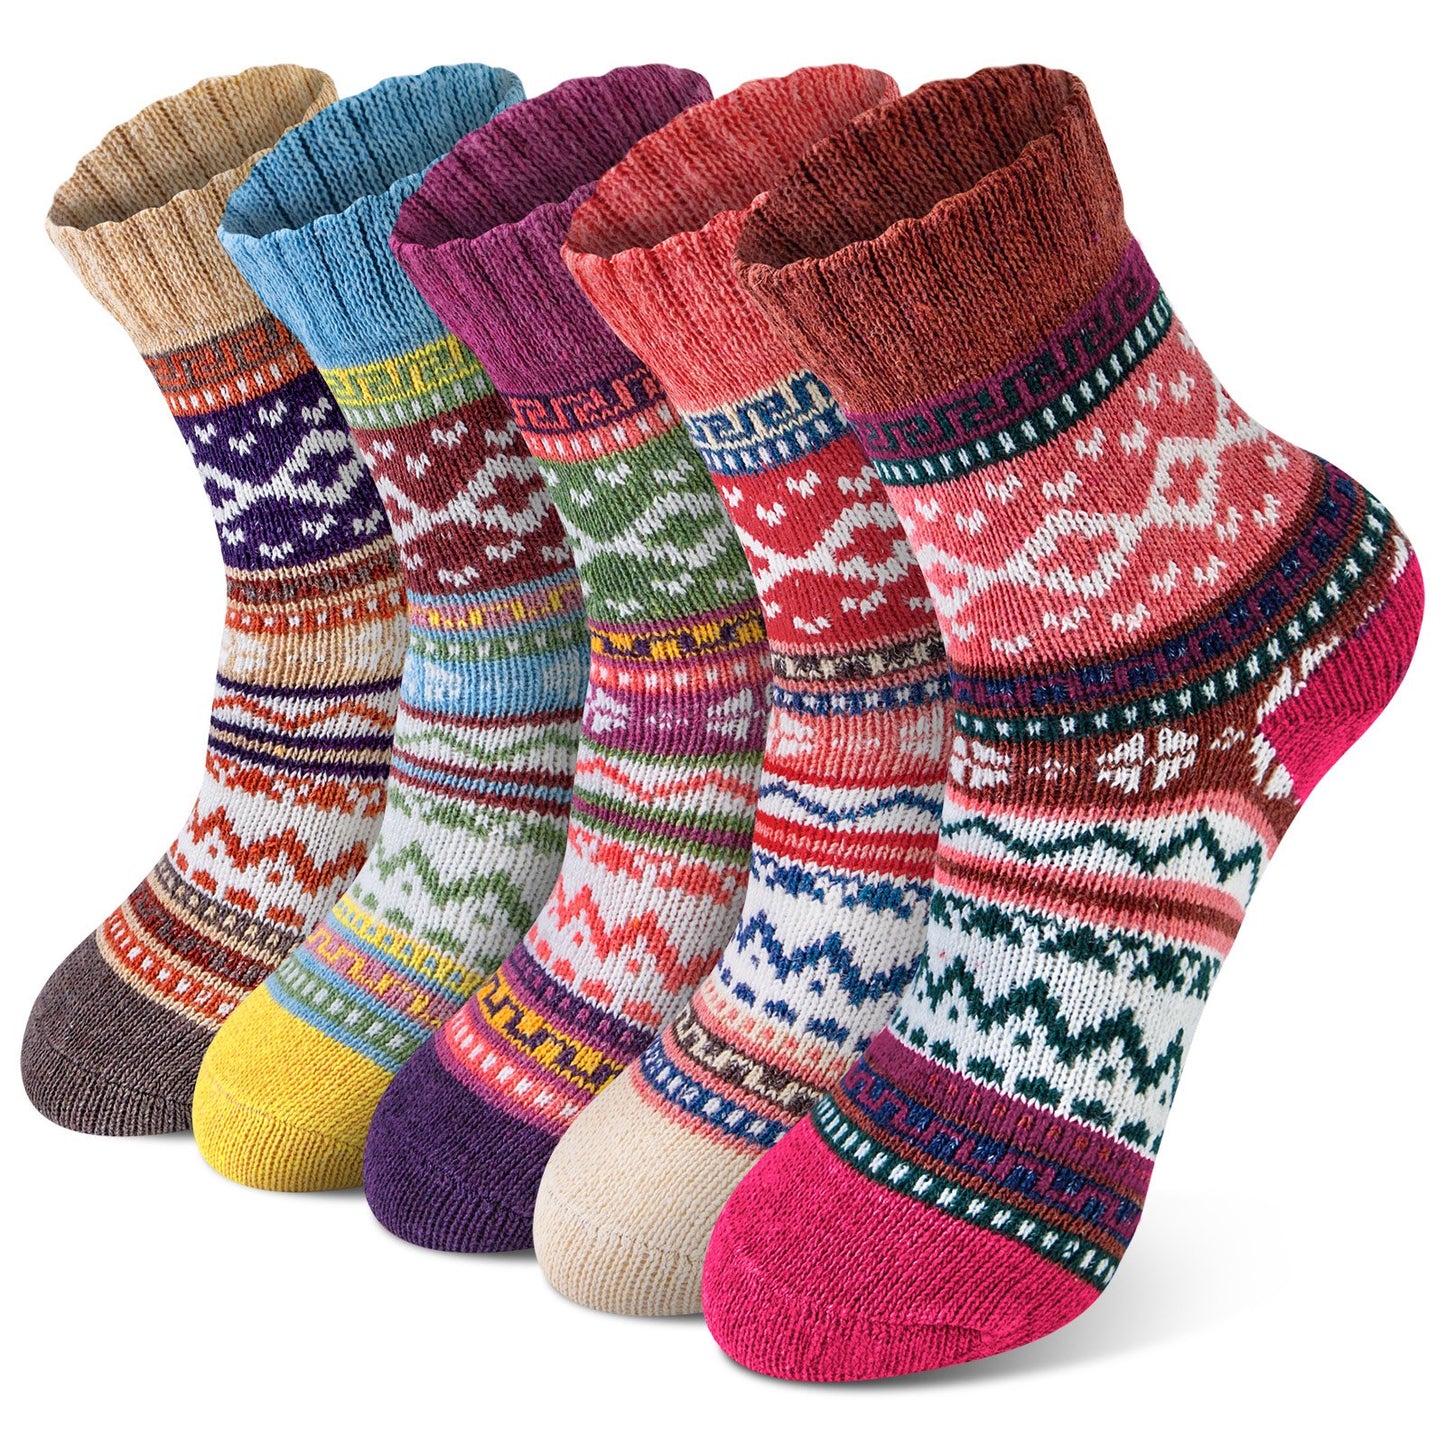 Loritta 5 Pairs Winter Socks for Women,Thick Knit Thermal Crew Wool Women Socks Gifts for Women